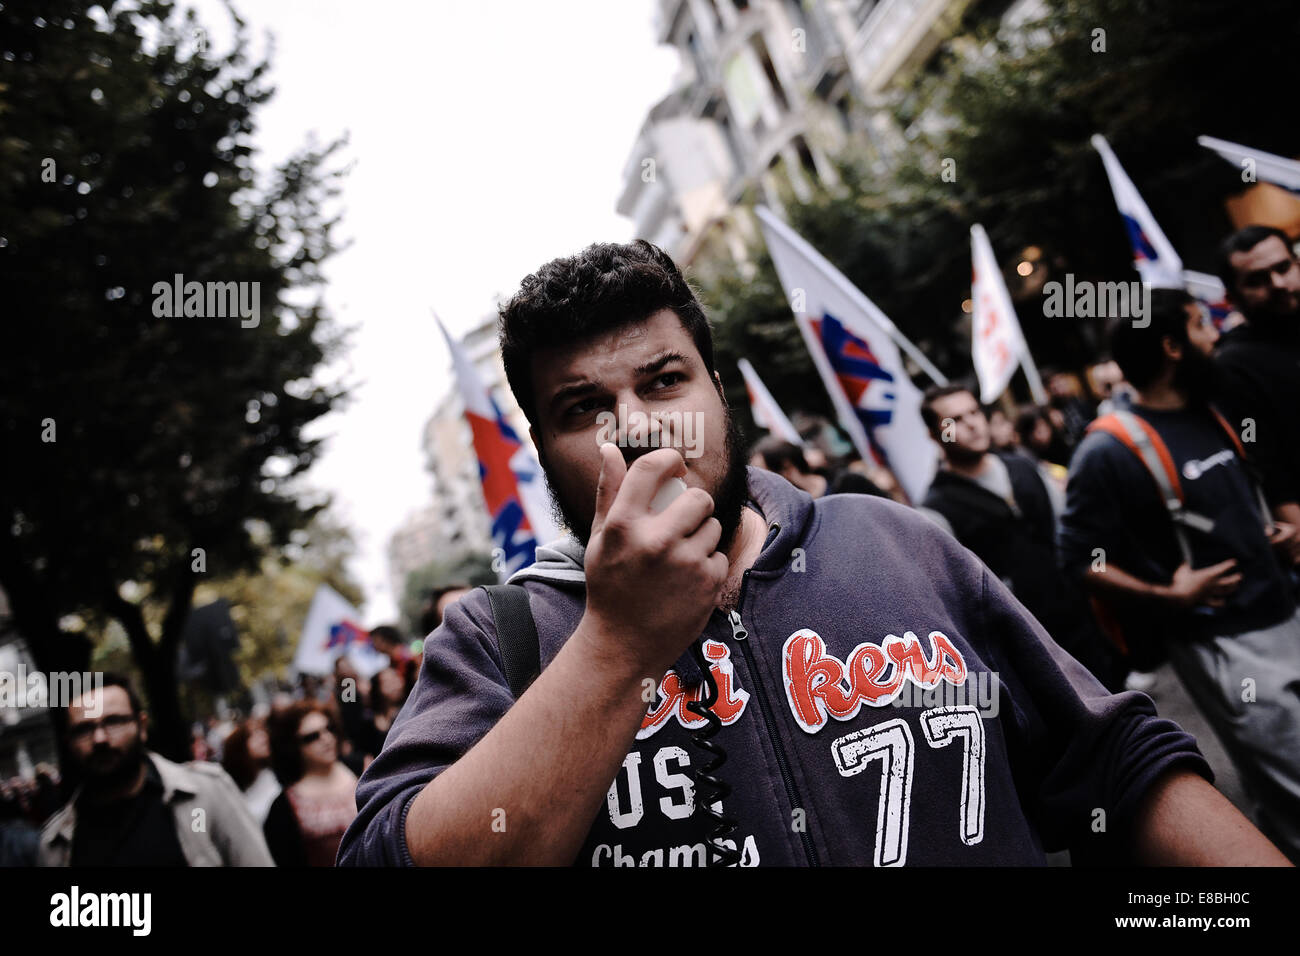 A man shouts slogans during a demonstration at the city of Thessaloniki in northern Greece. Hundreds of people took the streets of Thessaloniki to demonstrate against the unemployment in Greece and the government of Antonis Samaras policy. The demonstration was organized by P.A.ME. Or All Workers Militant Front. Stock Photo